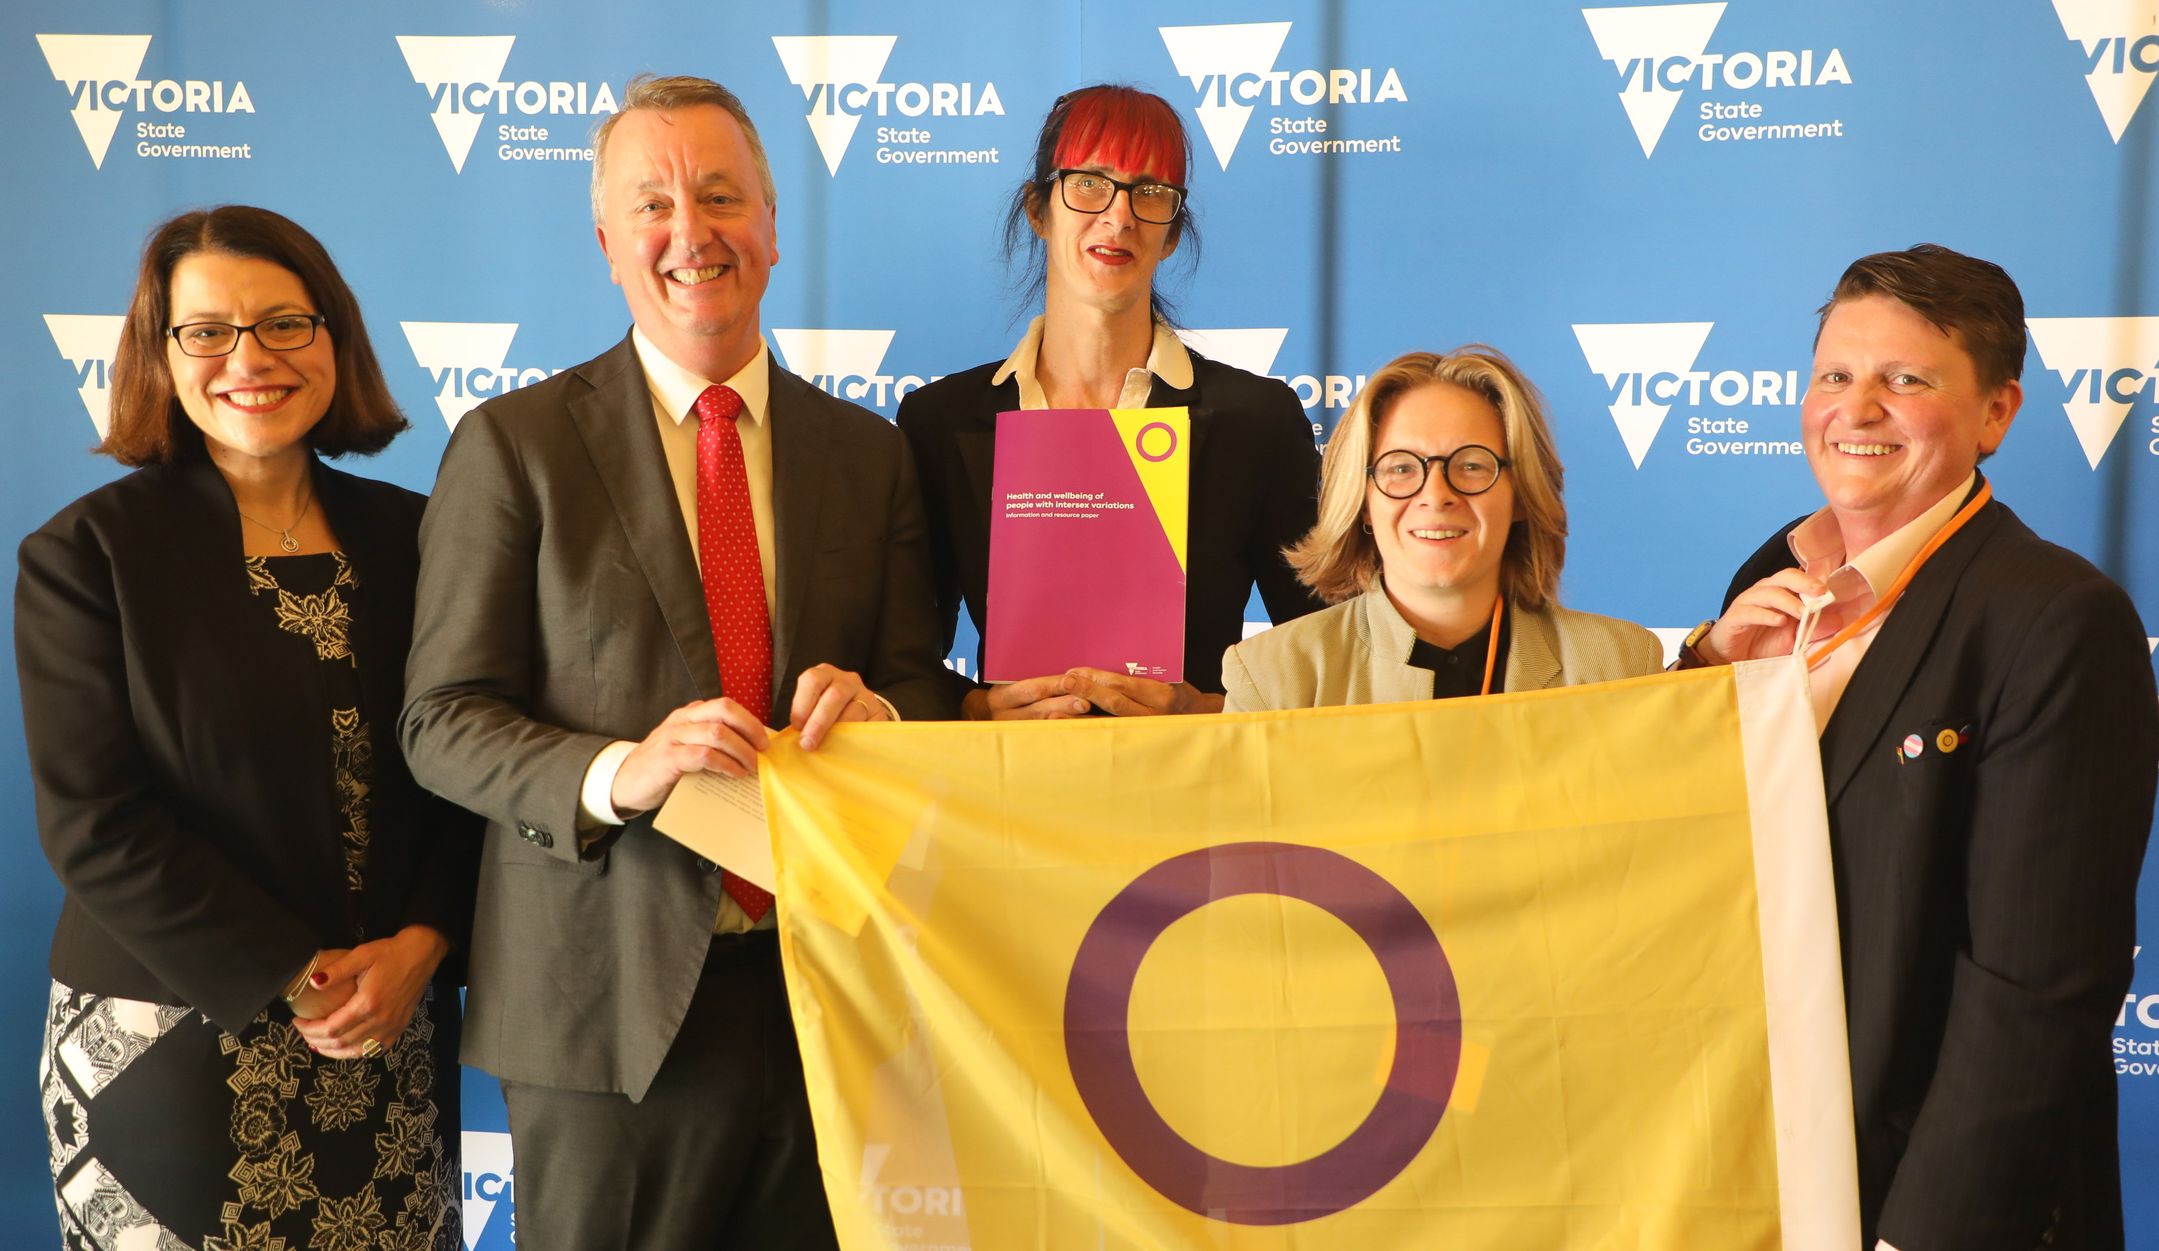 Victoria launches “historic” intersex resources for health services and families